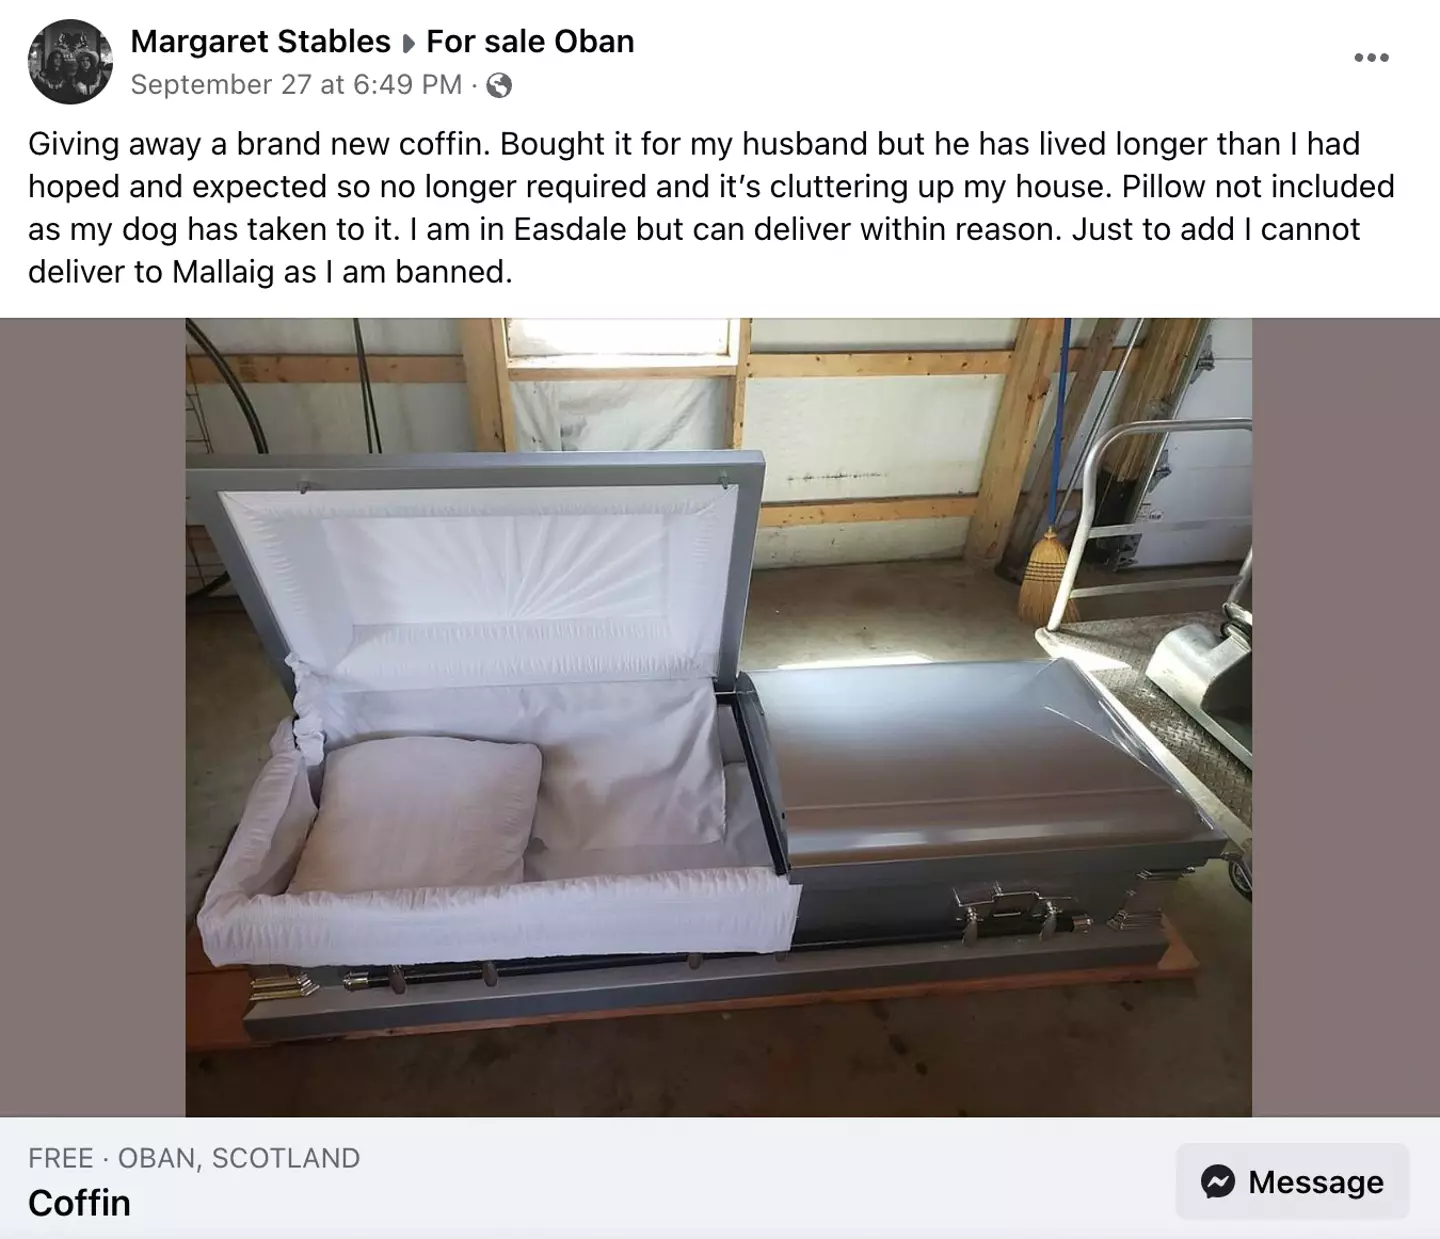 The coffin was being given away for free.